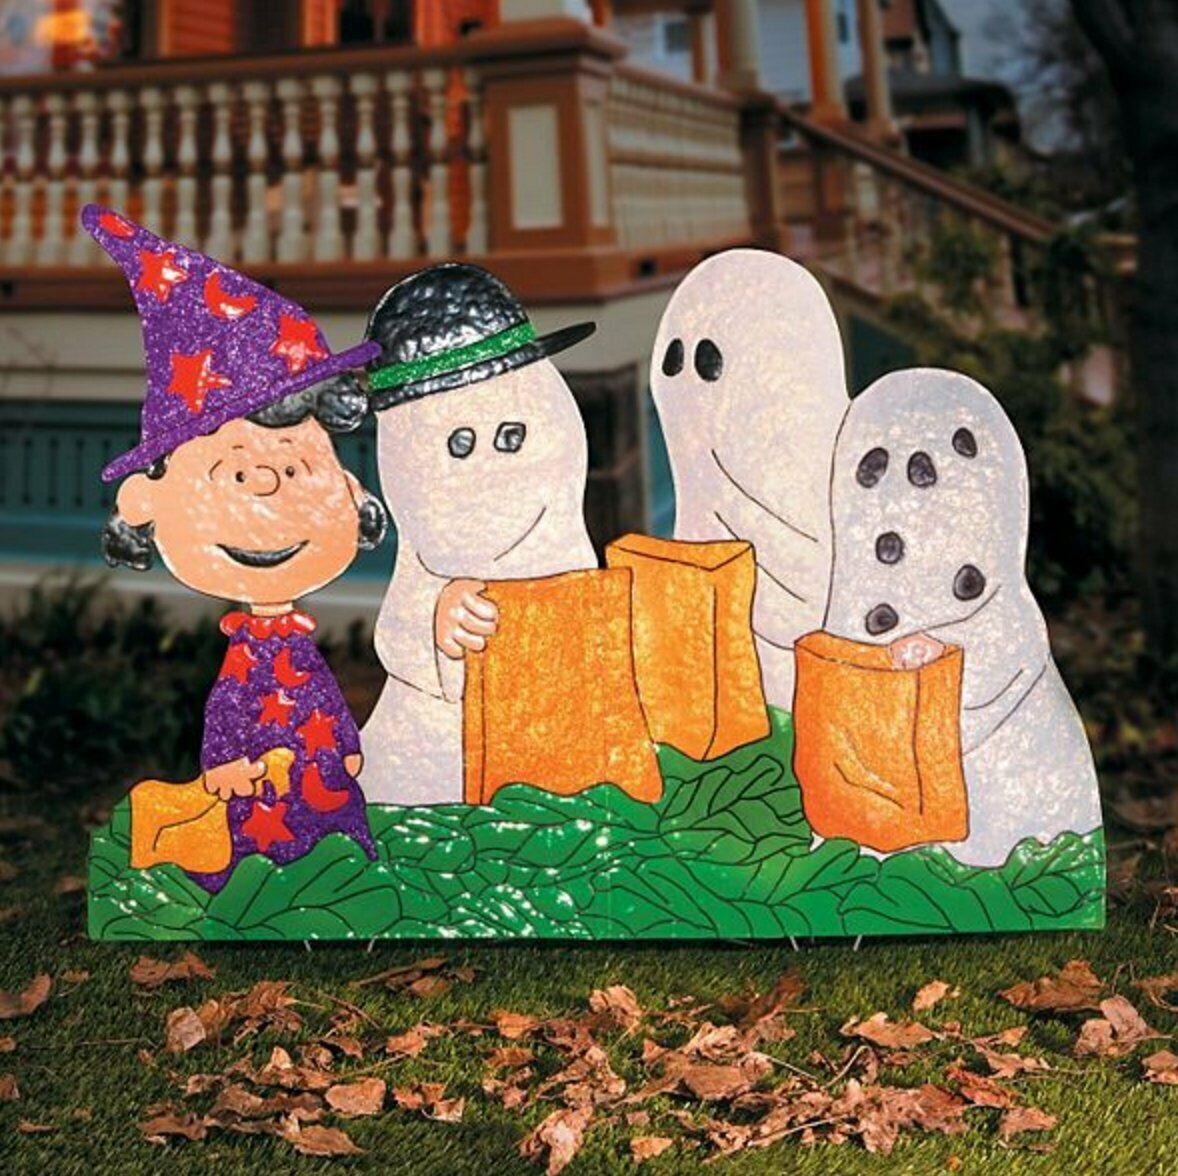 Peanuts Gang in Costumes Hammered Metal Outdoor Halloween Decor Charlie Brown 